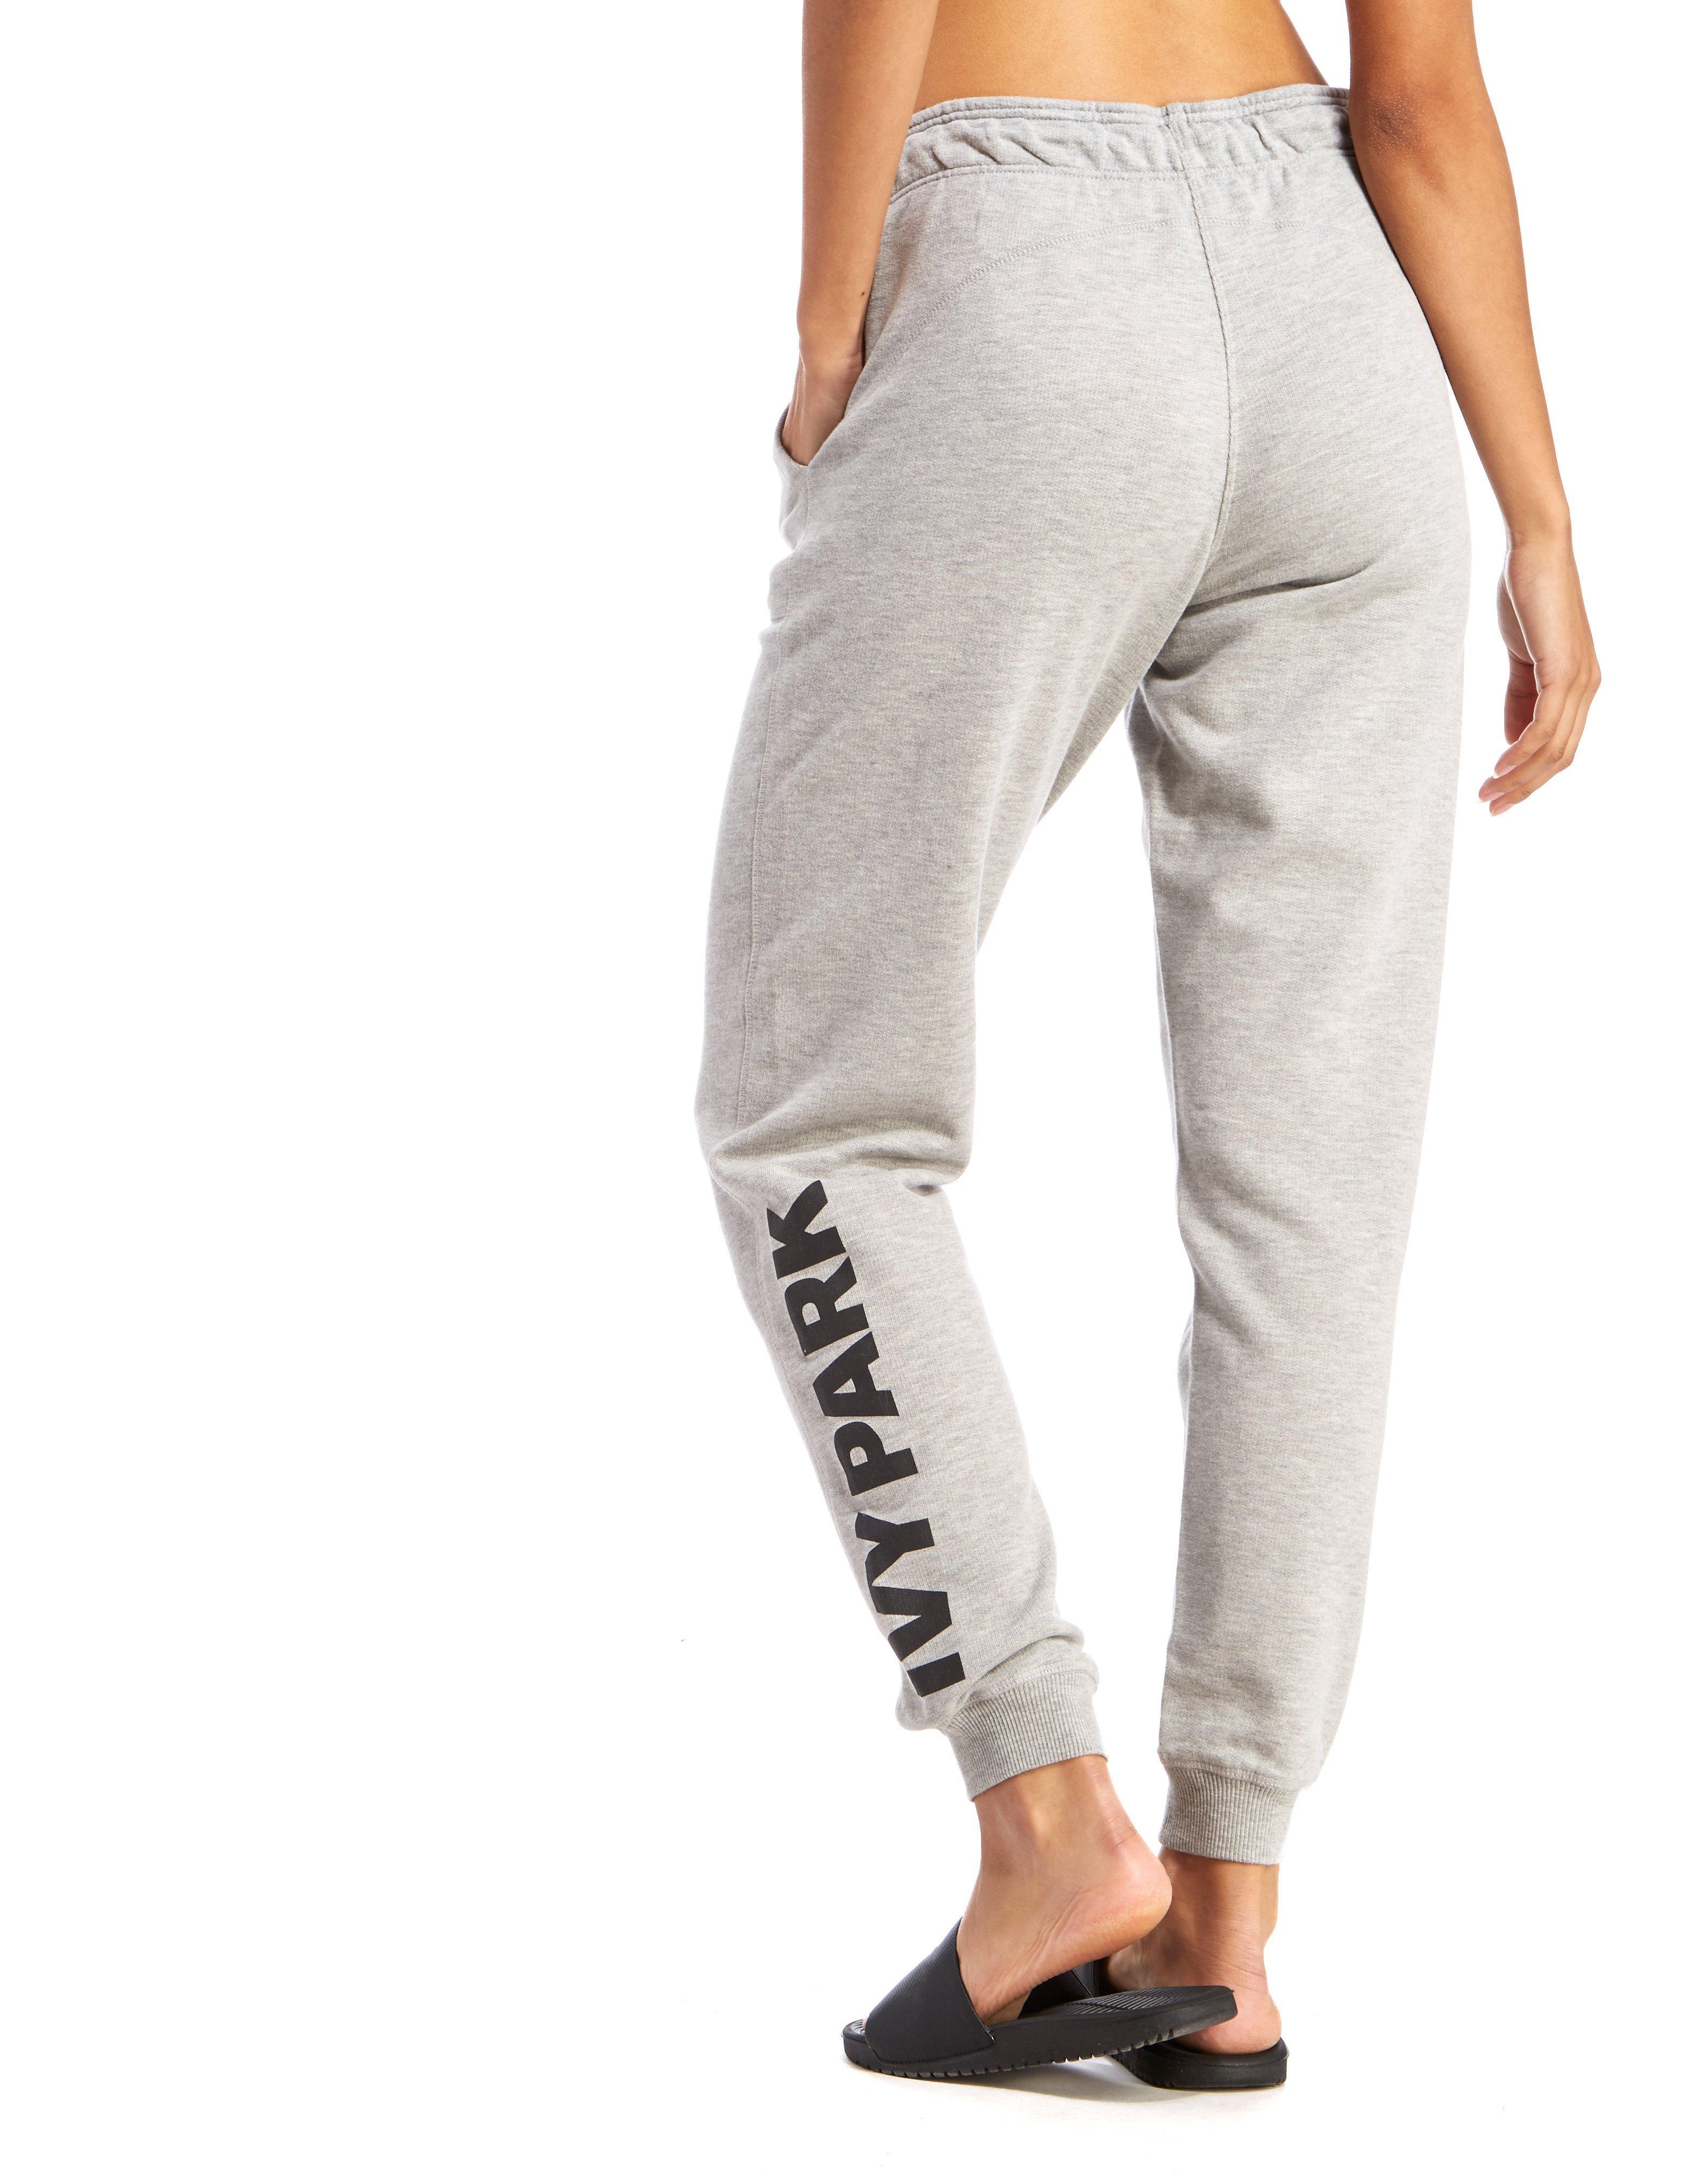 Ivy Park Cotton Jogging Pants in Grey (Gray) - Lyst